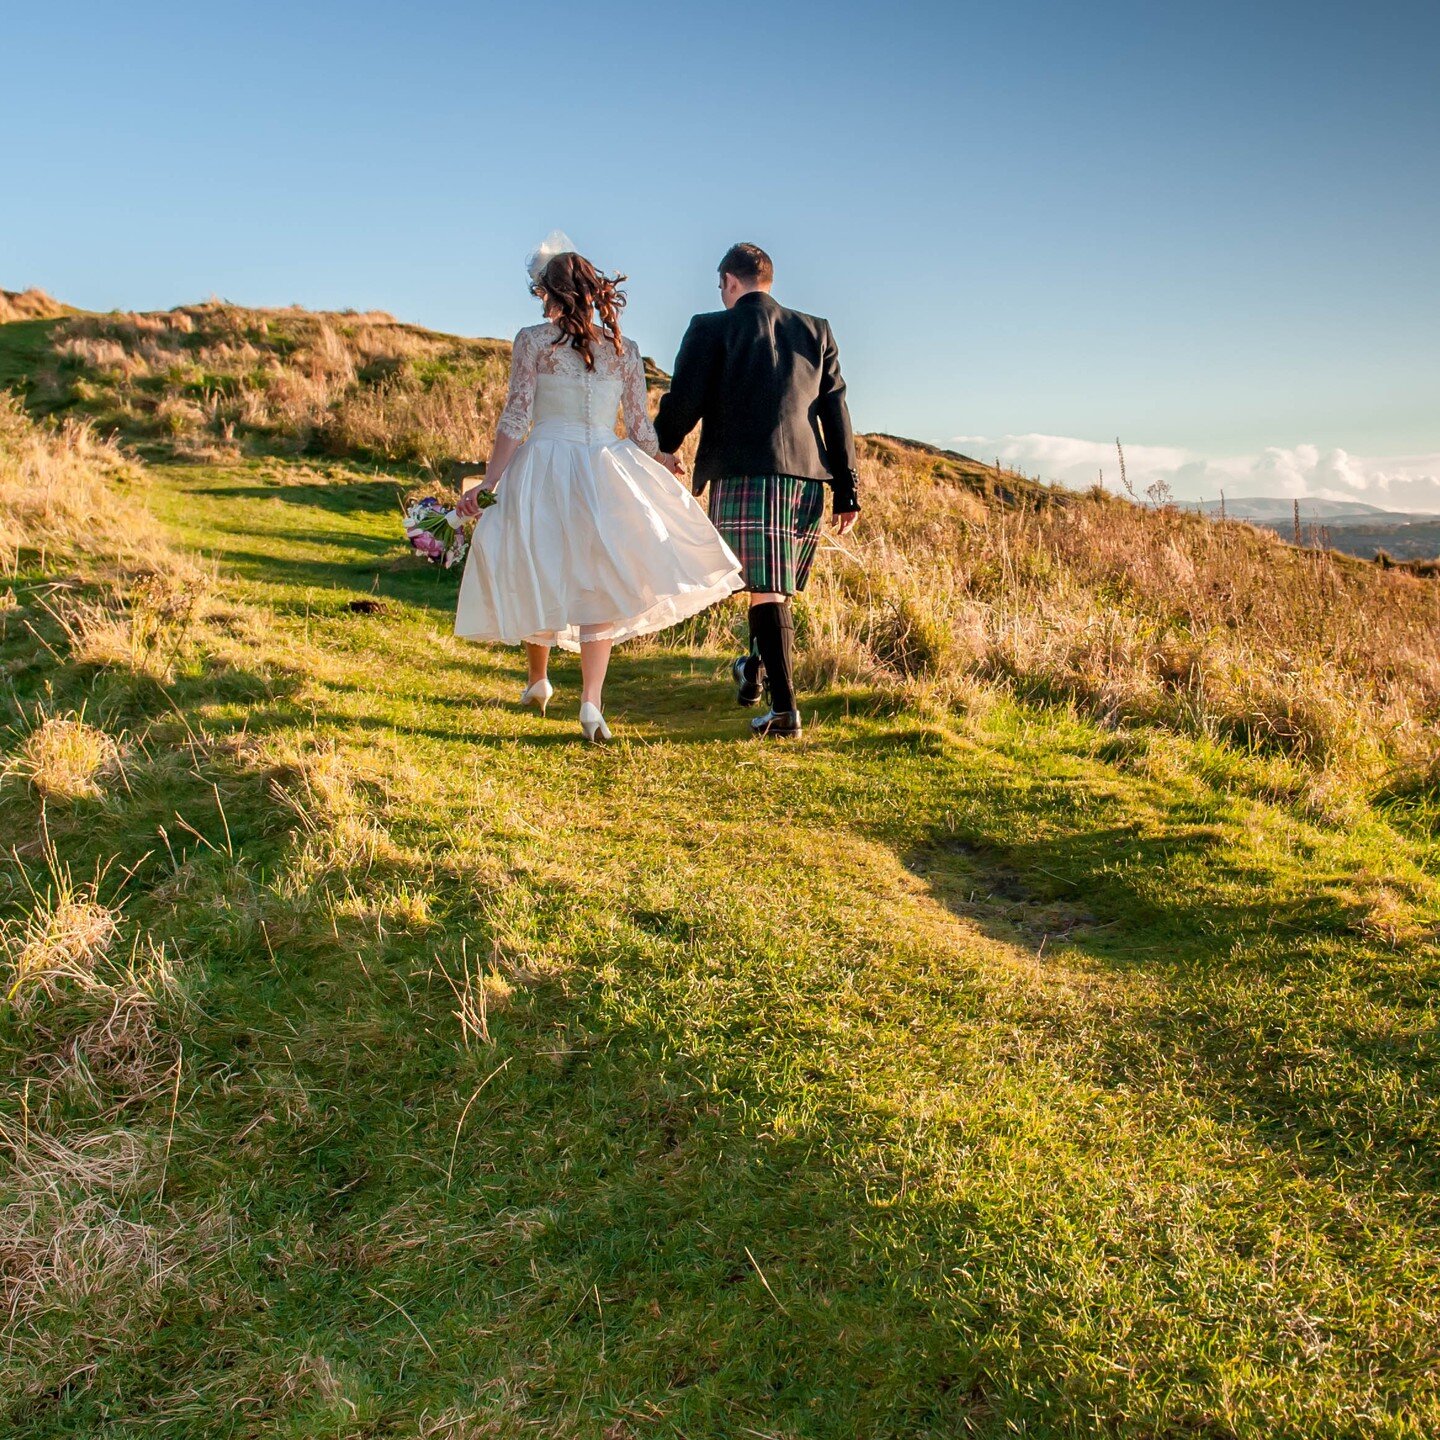 Love using amazing locations for the bride and groom portraits, pictured here we are using Arthur's Seat in Edinburgh #weddingphotography #edinburgh #arthursseat #brideandgroomphotos #weddingplanning